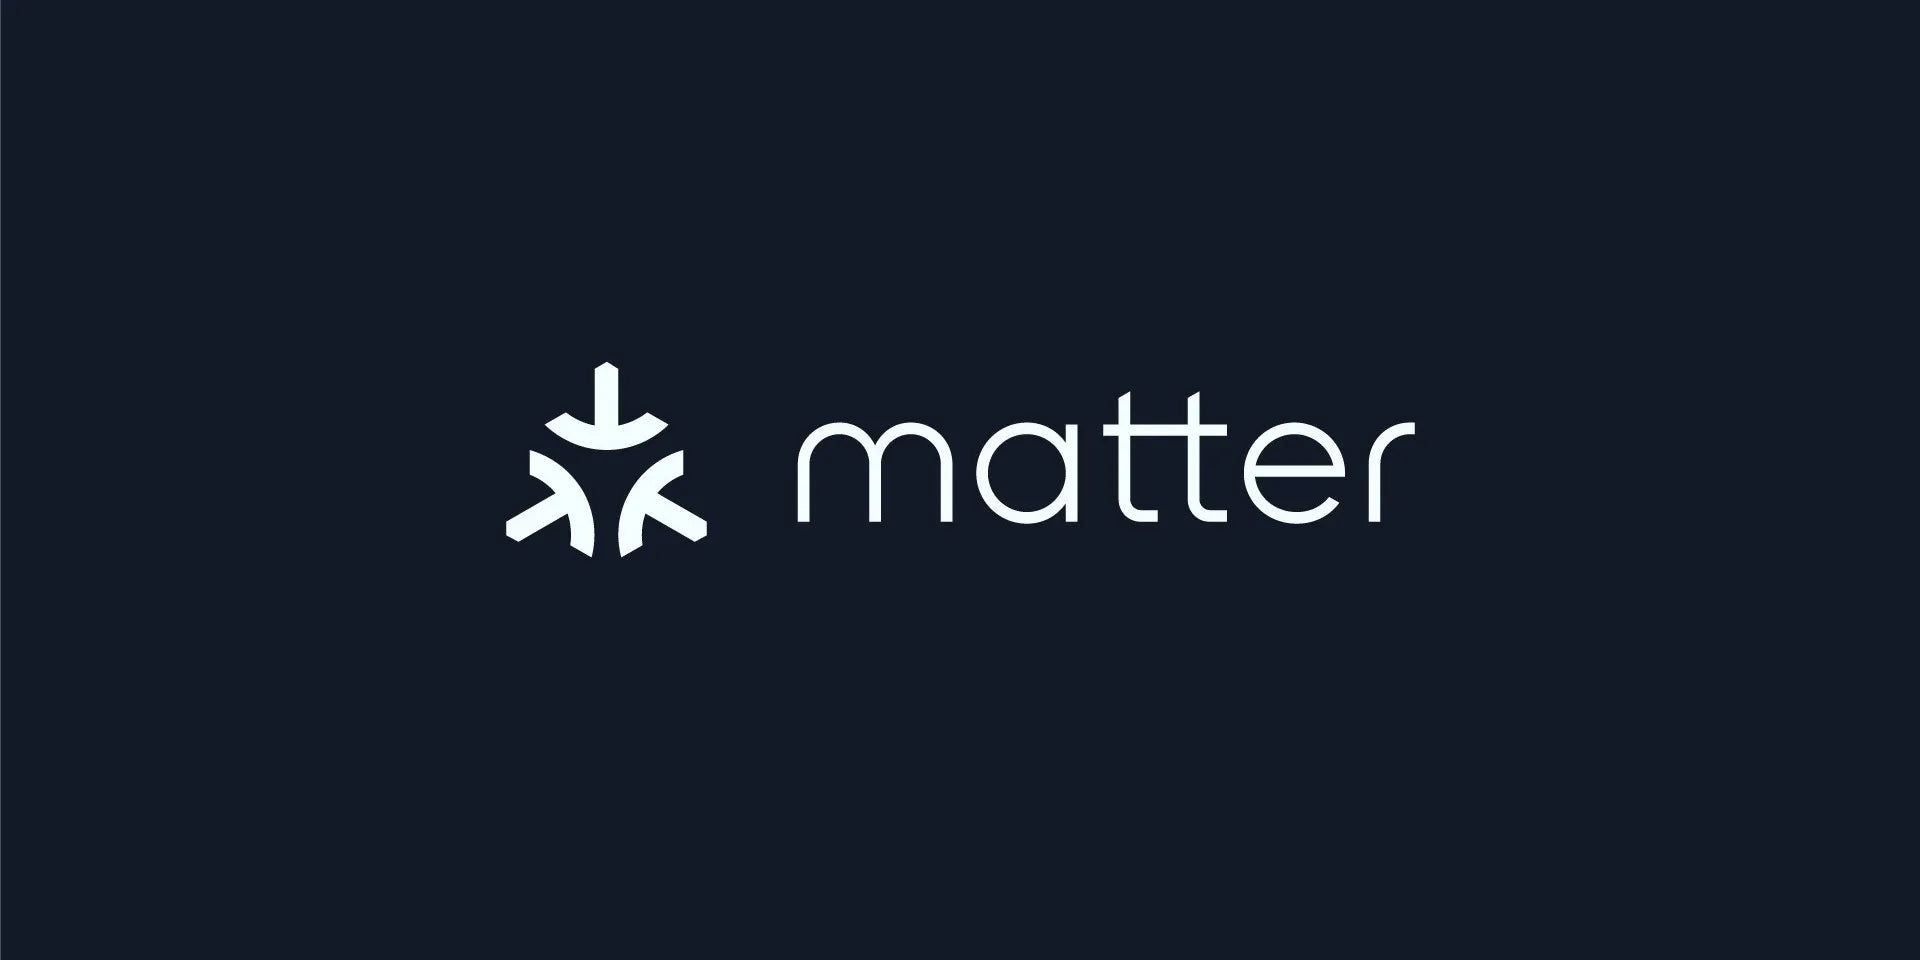 Matter smart home - The future is here